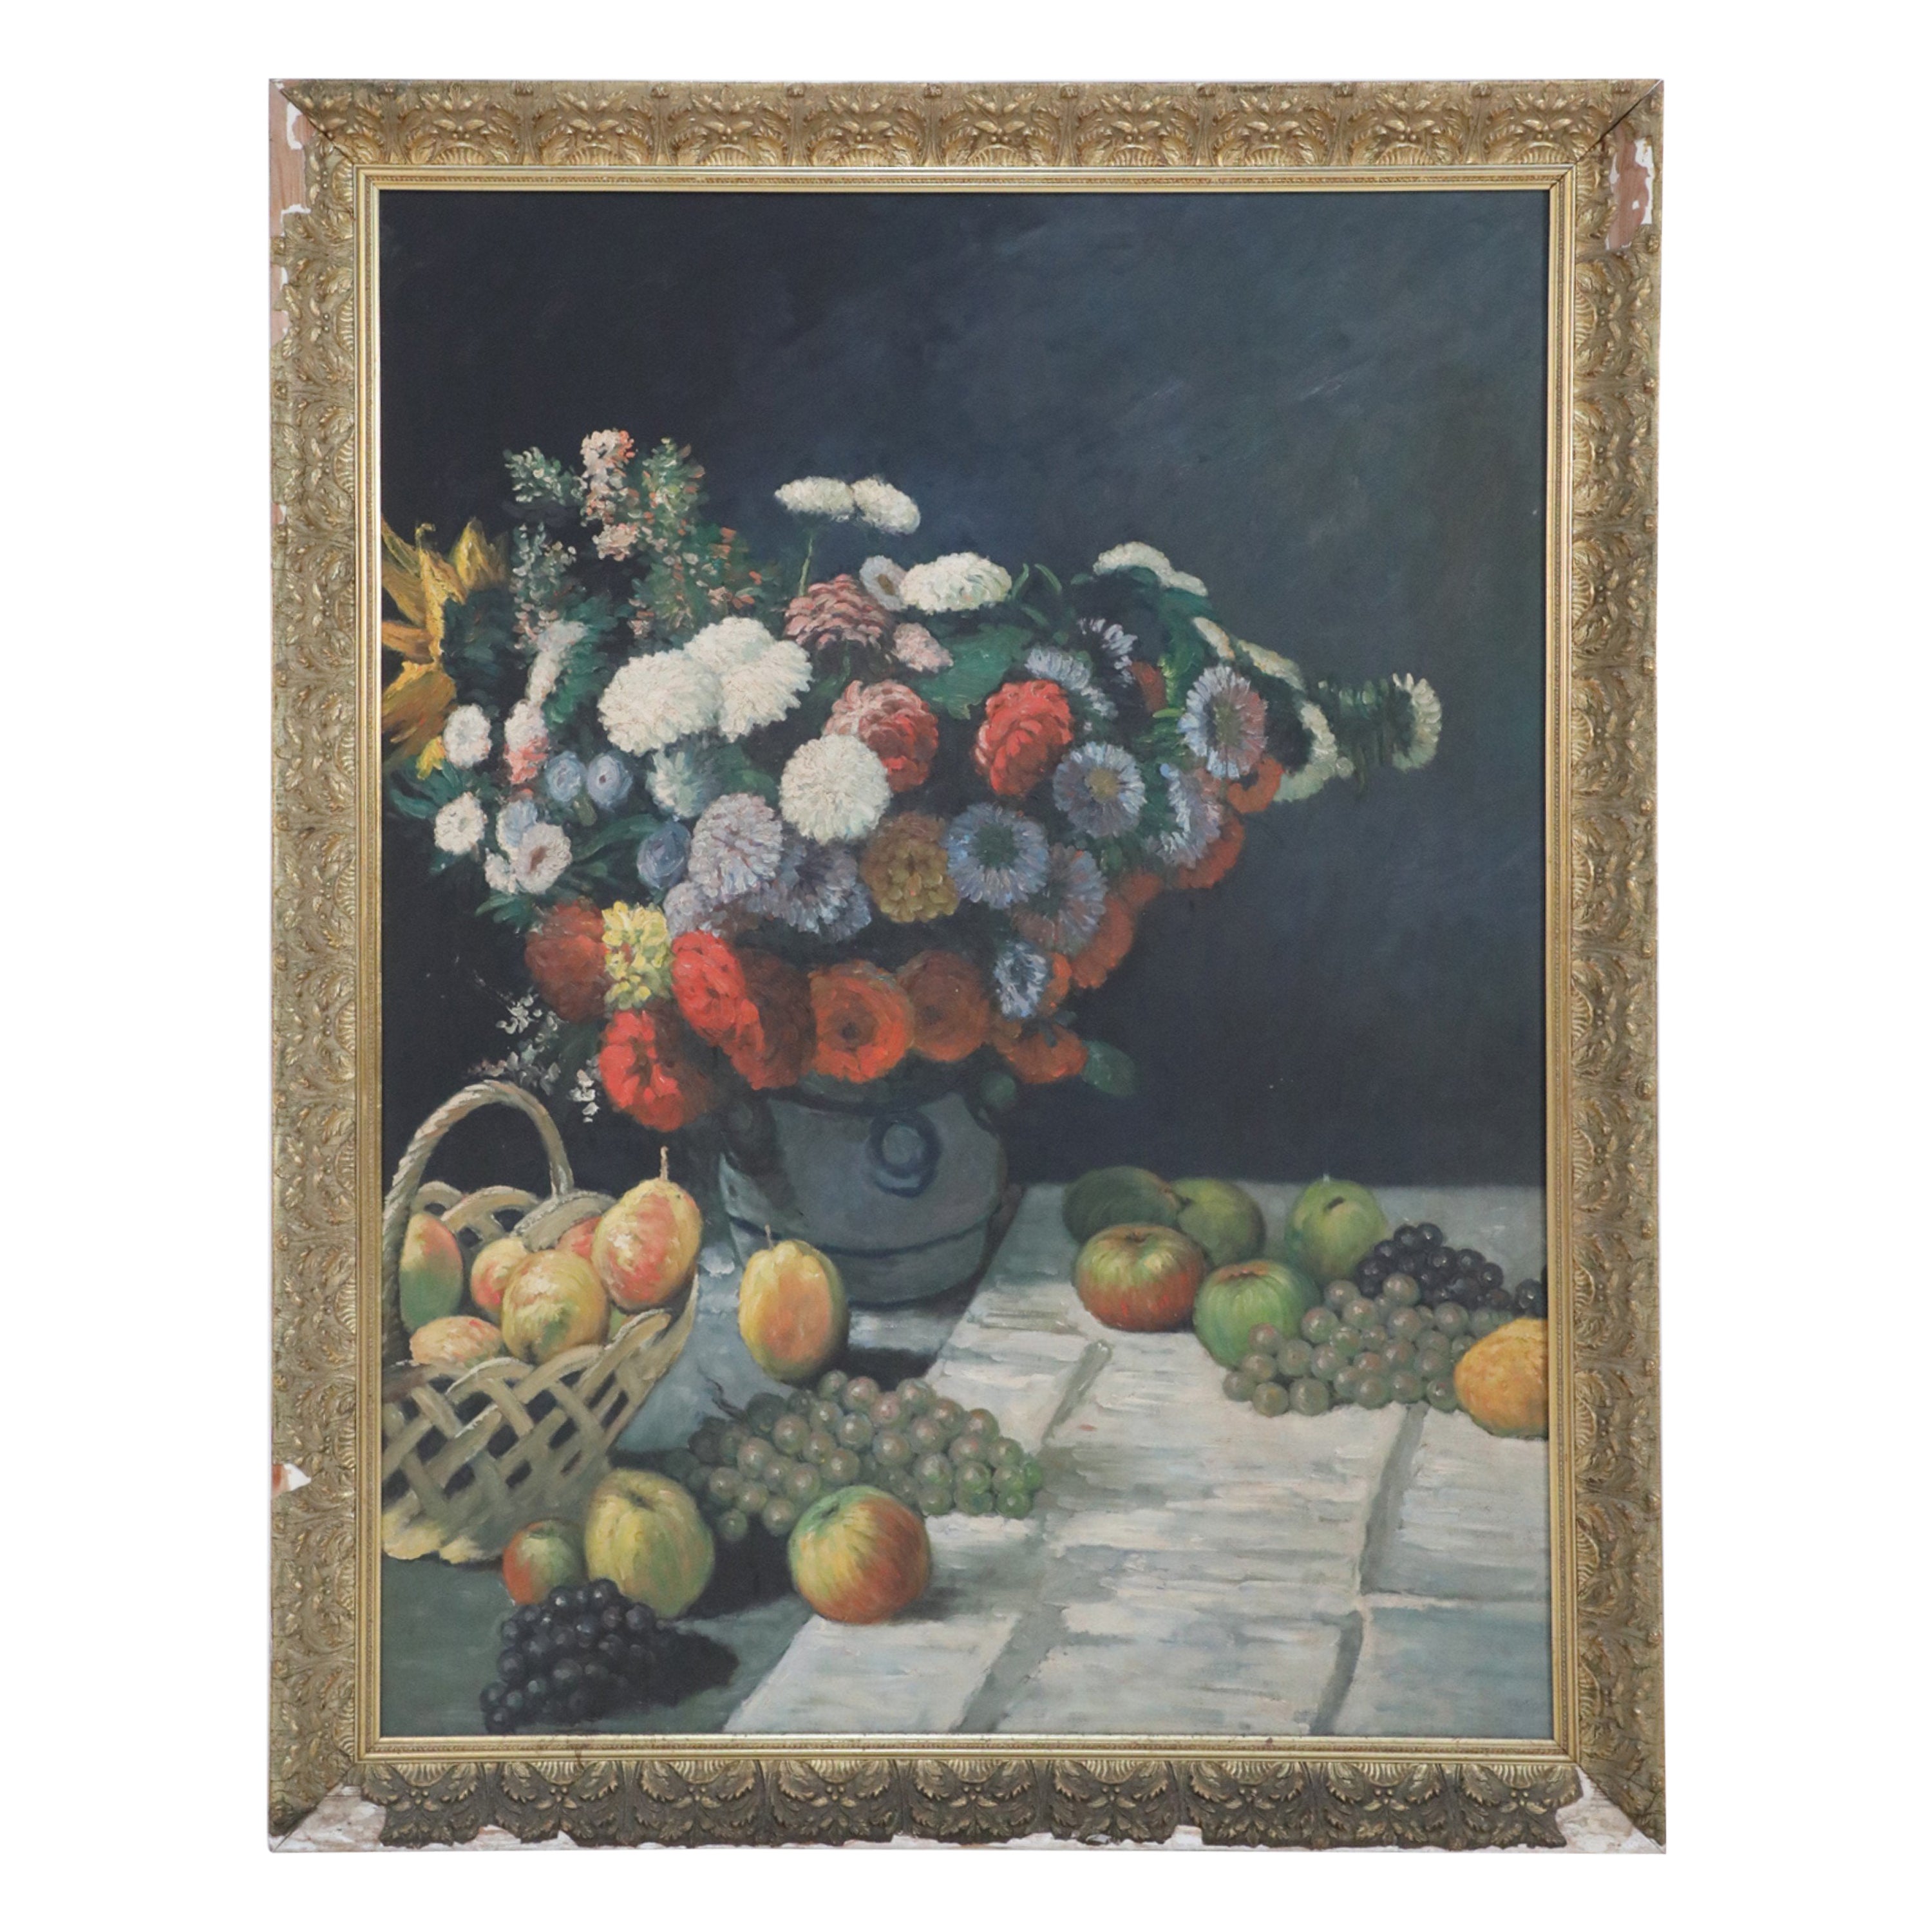 Framed Still Life Oil Painting of a Flower Arrangement and Scattered Grapes and